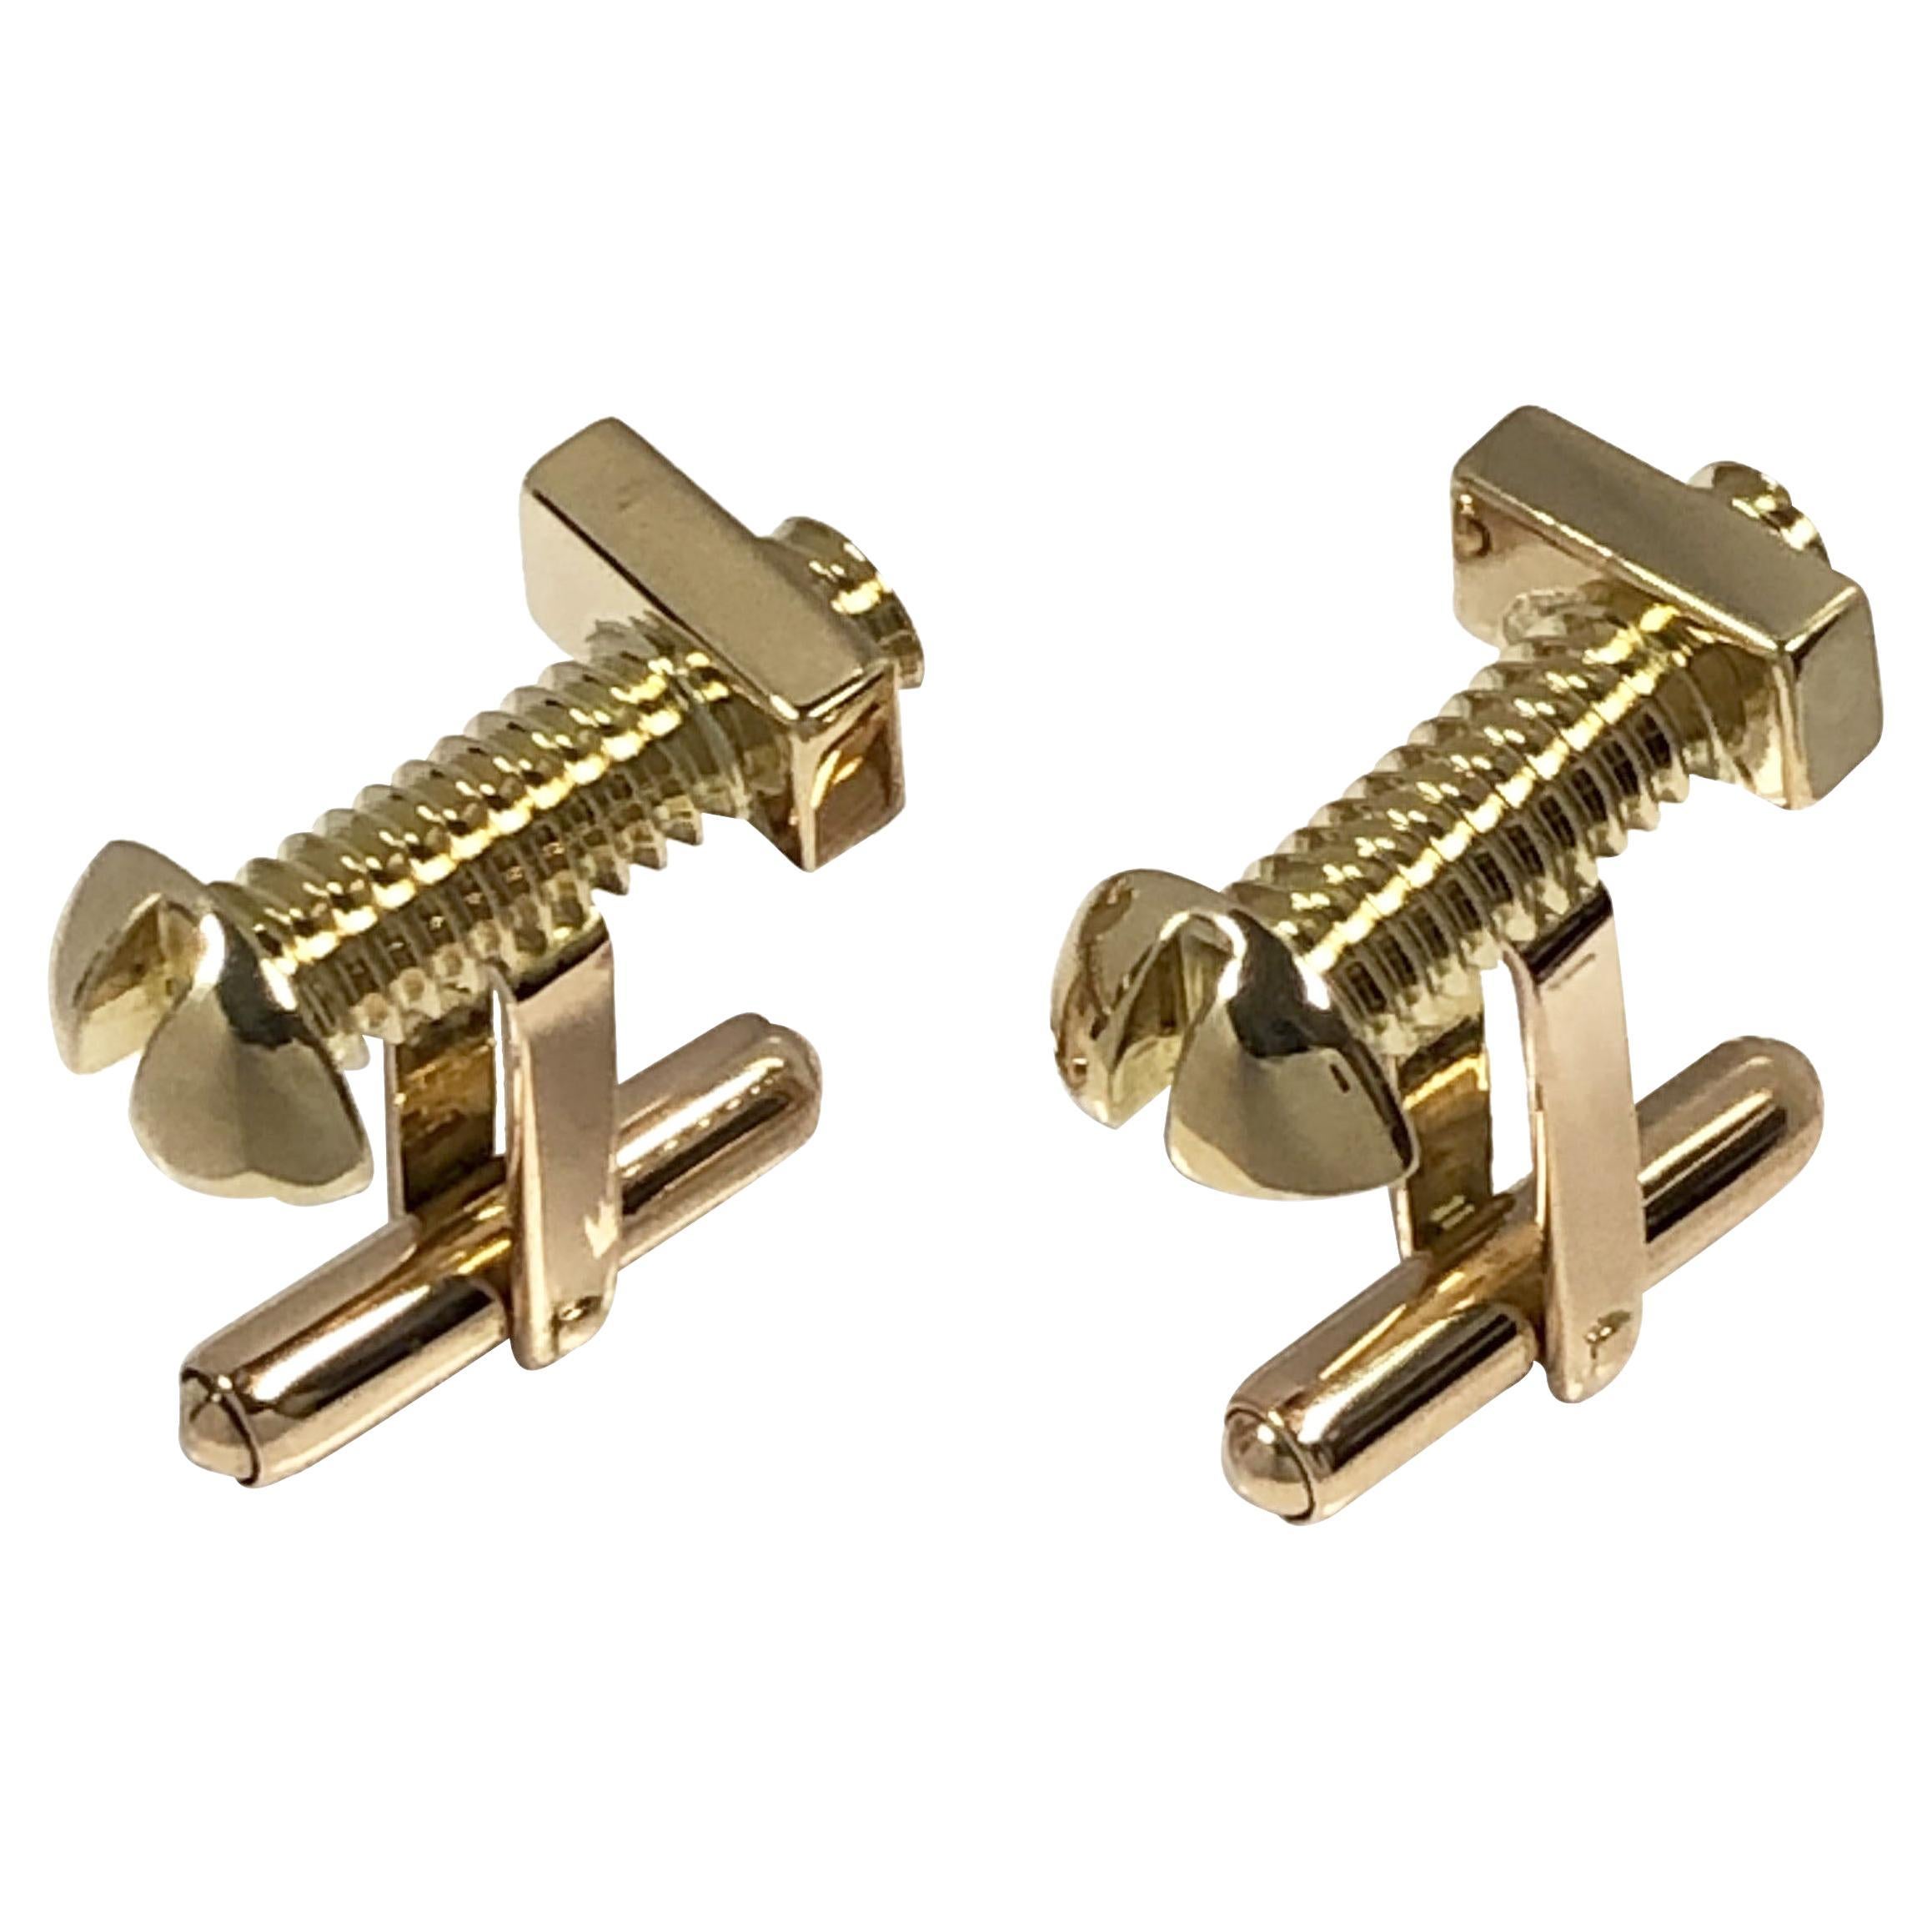 Vintage Nut and Bolt Design Whimsical Yellow Gold Cufflinks